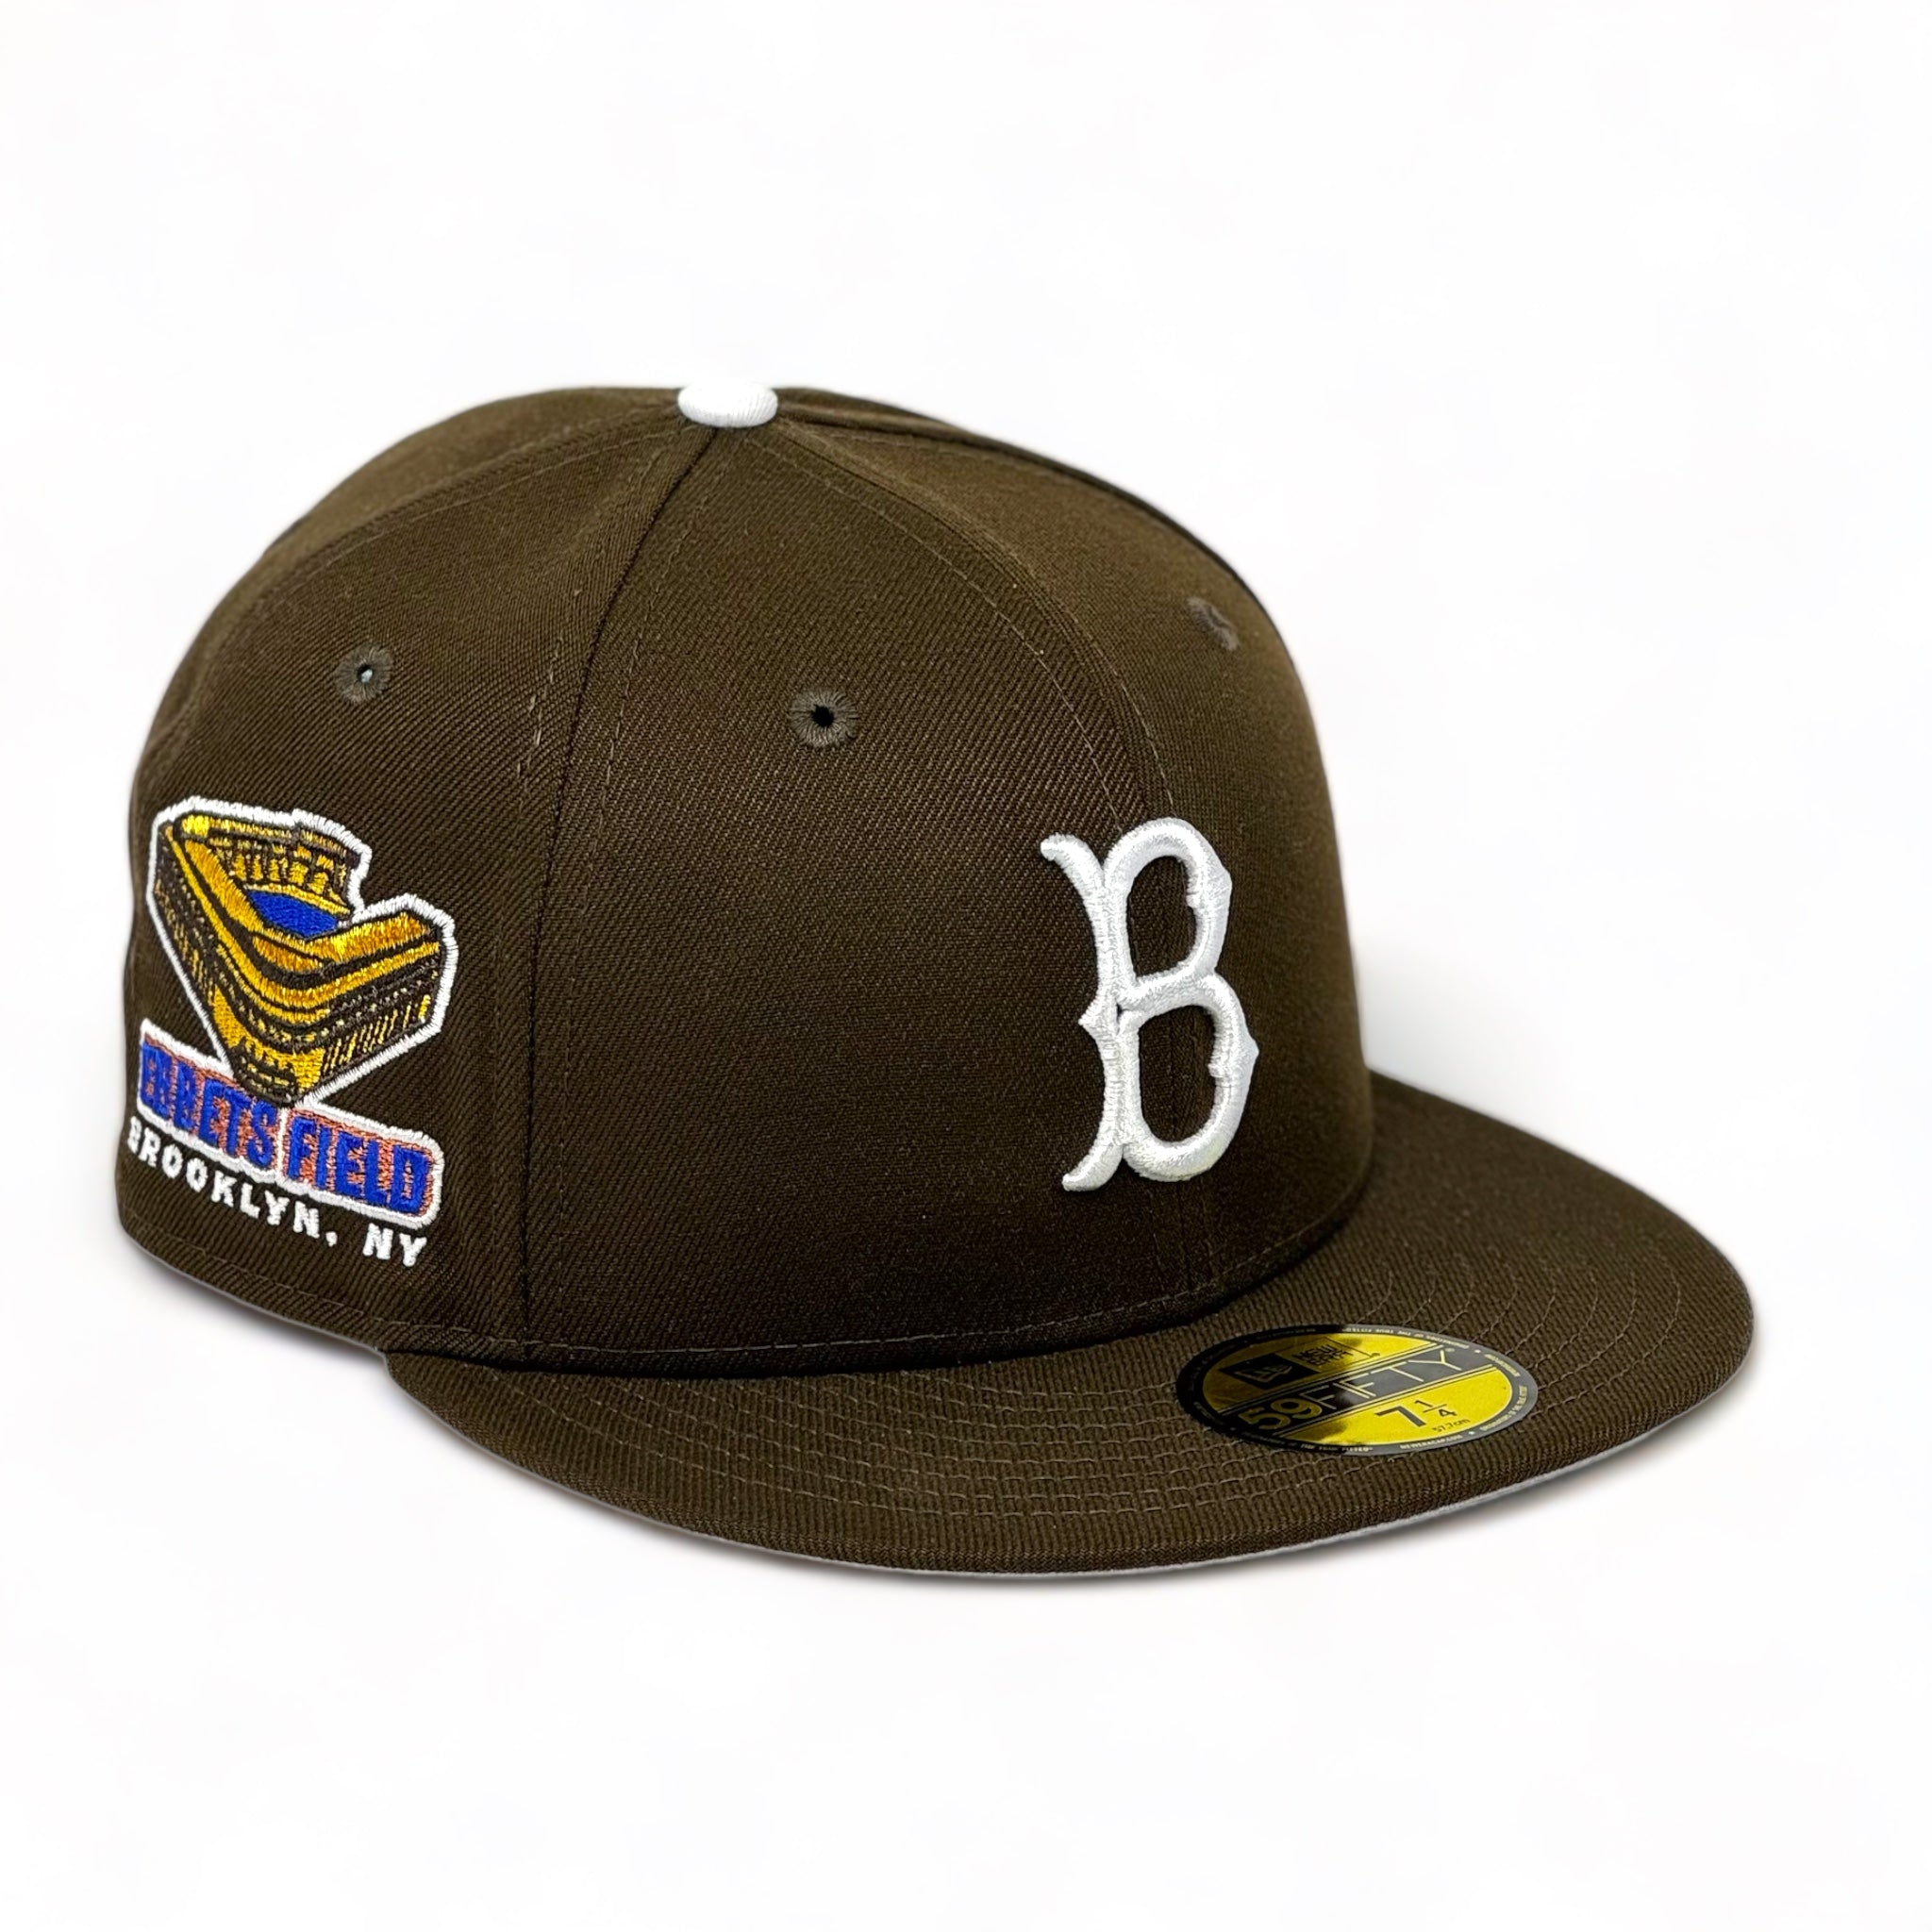 BROOKLYN DODGERS (BROWN) "EBBETS FIELD" NEW ERA 59FIFTY EXCLUSIVE FITTED